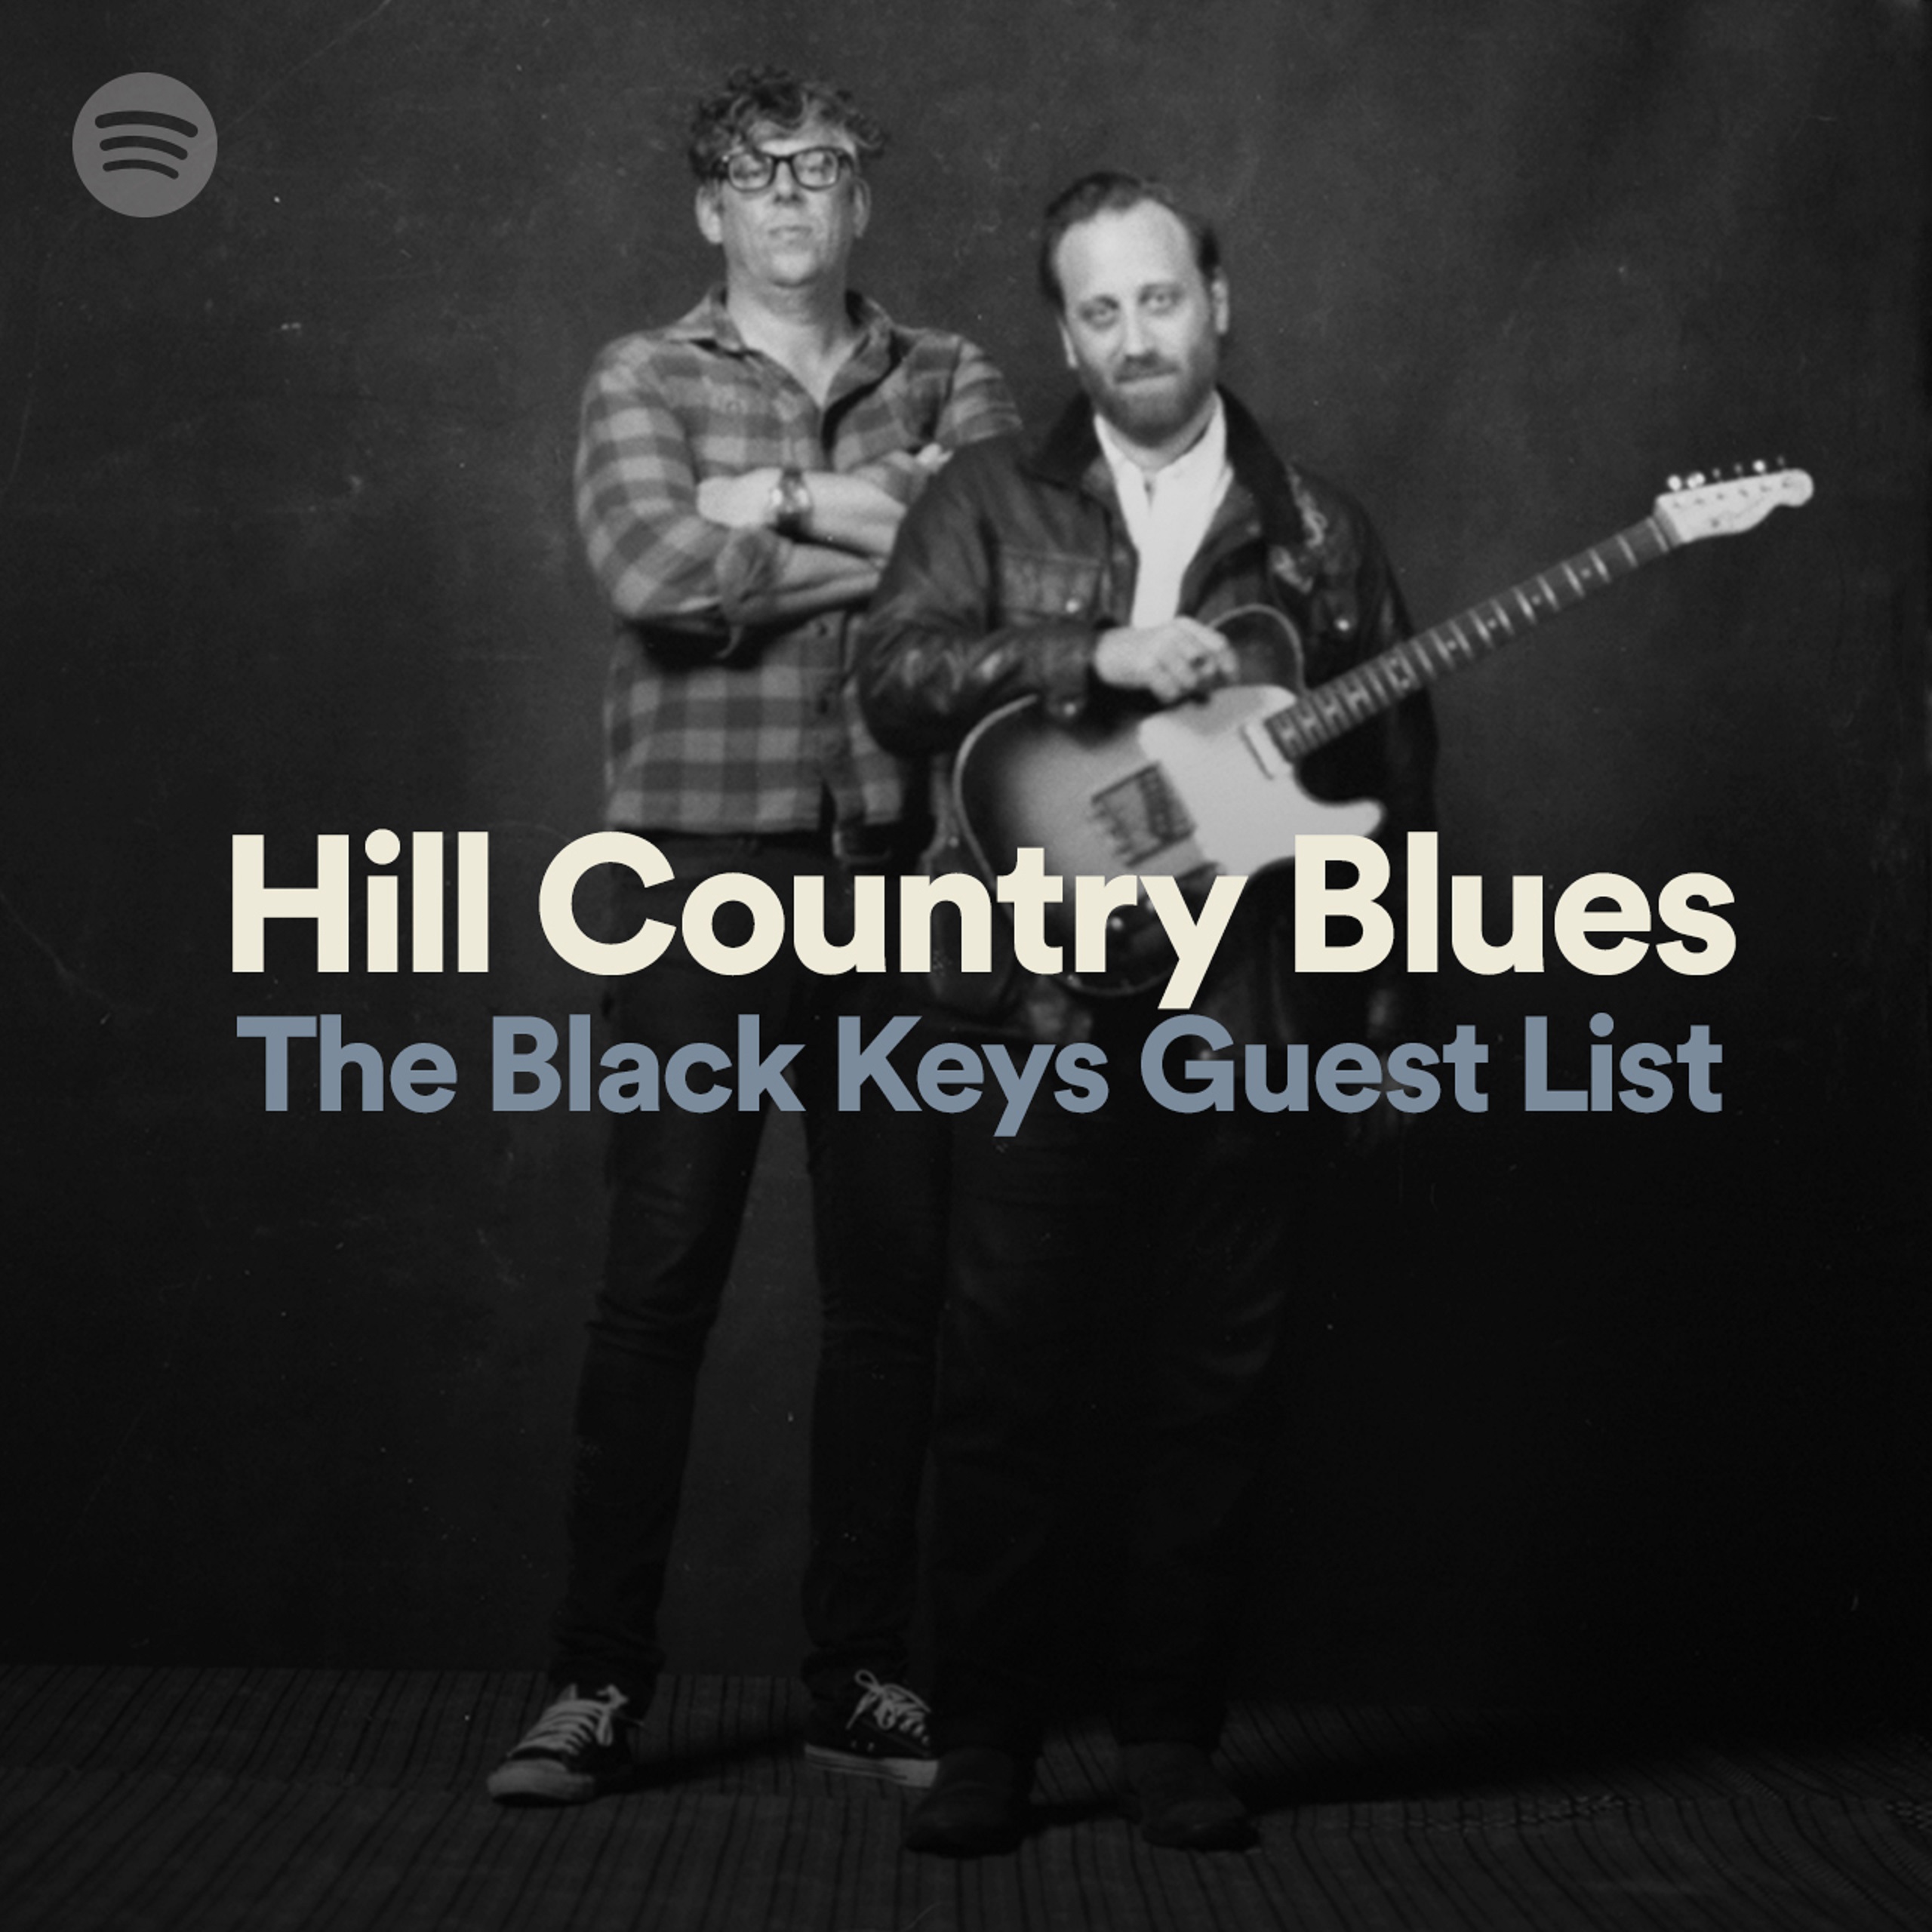 The Black Keys + Spotify launched a Hill Country Blues playlist